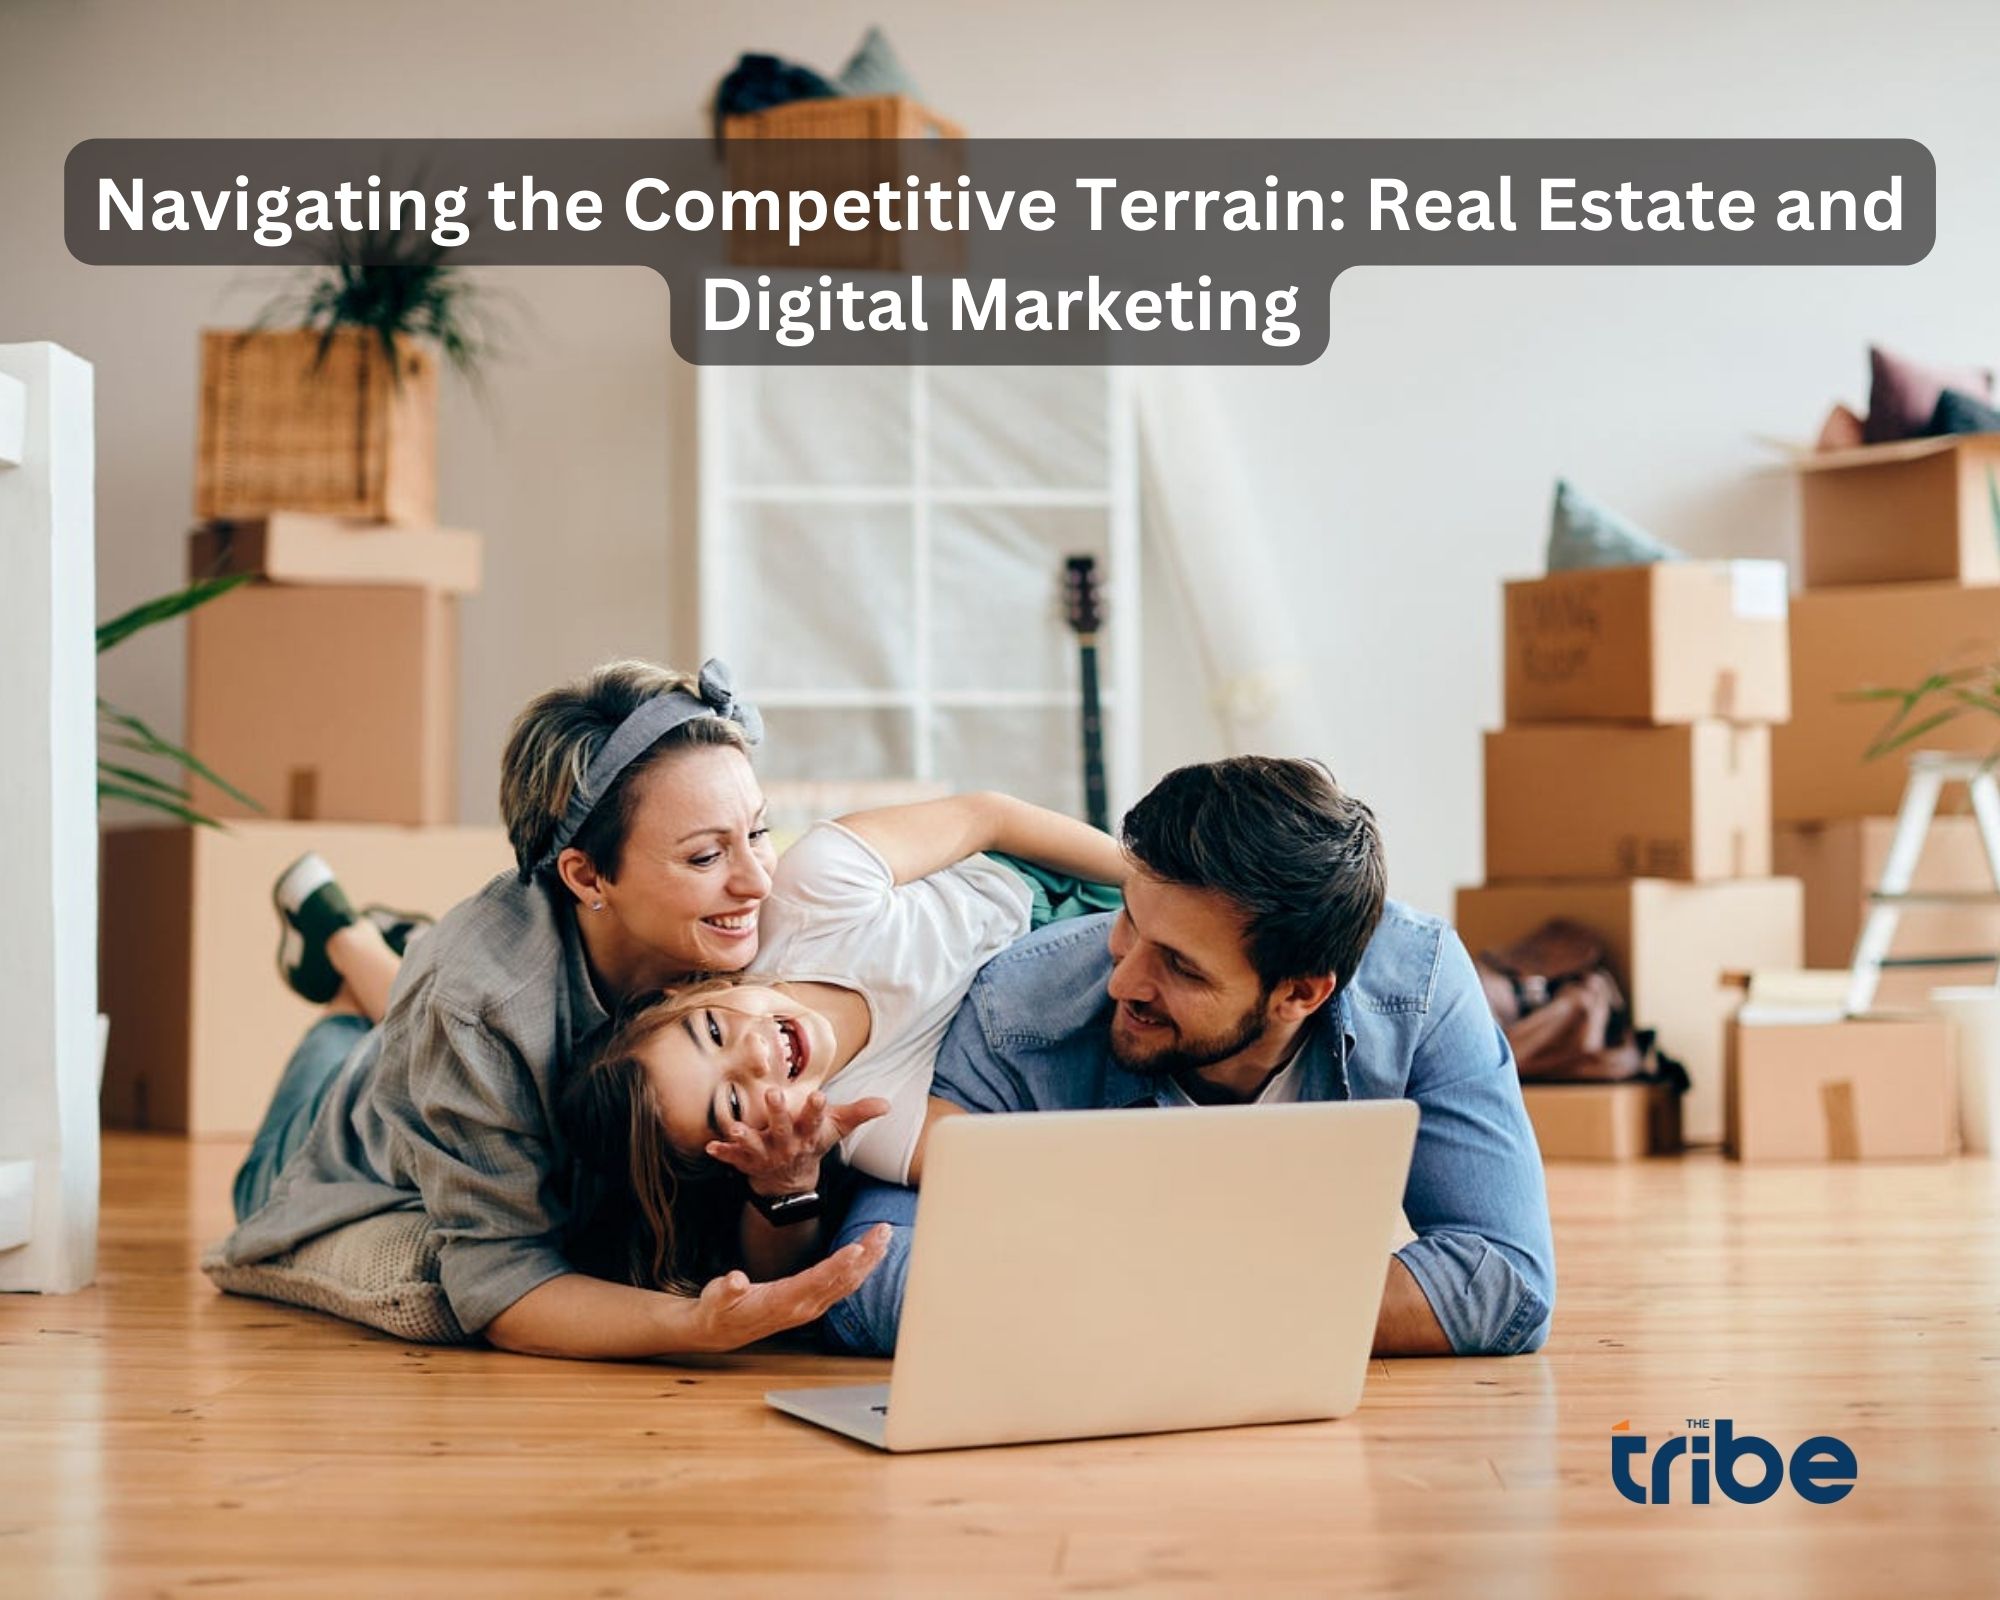 Real Estate Digital Marketing: How to Get Ahead of the Competition